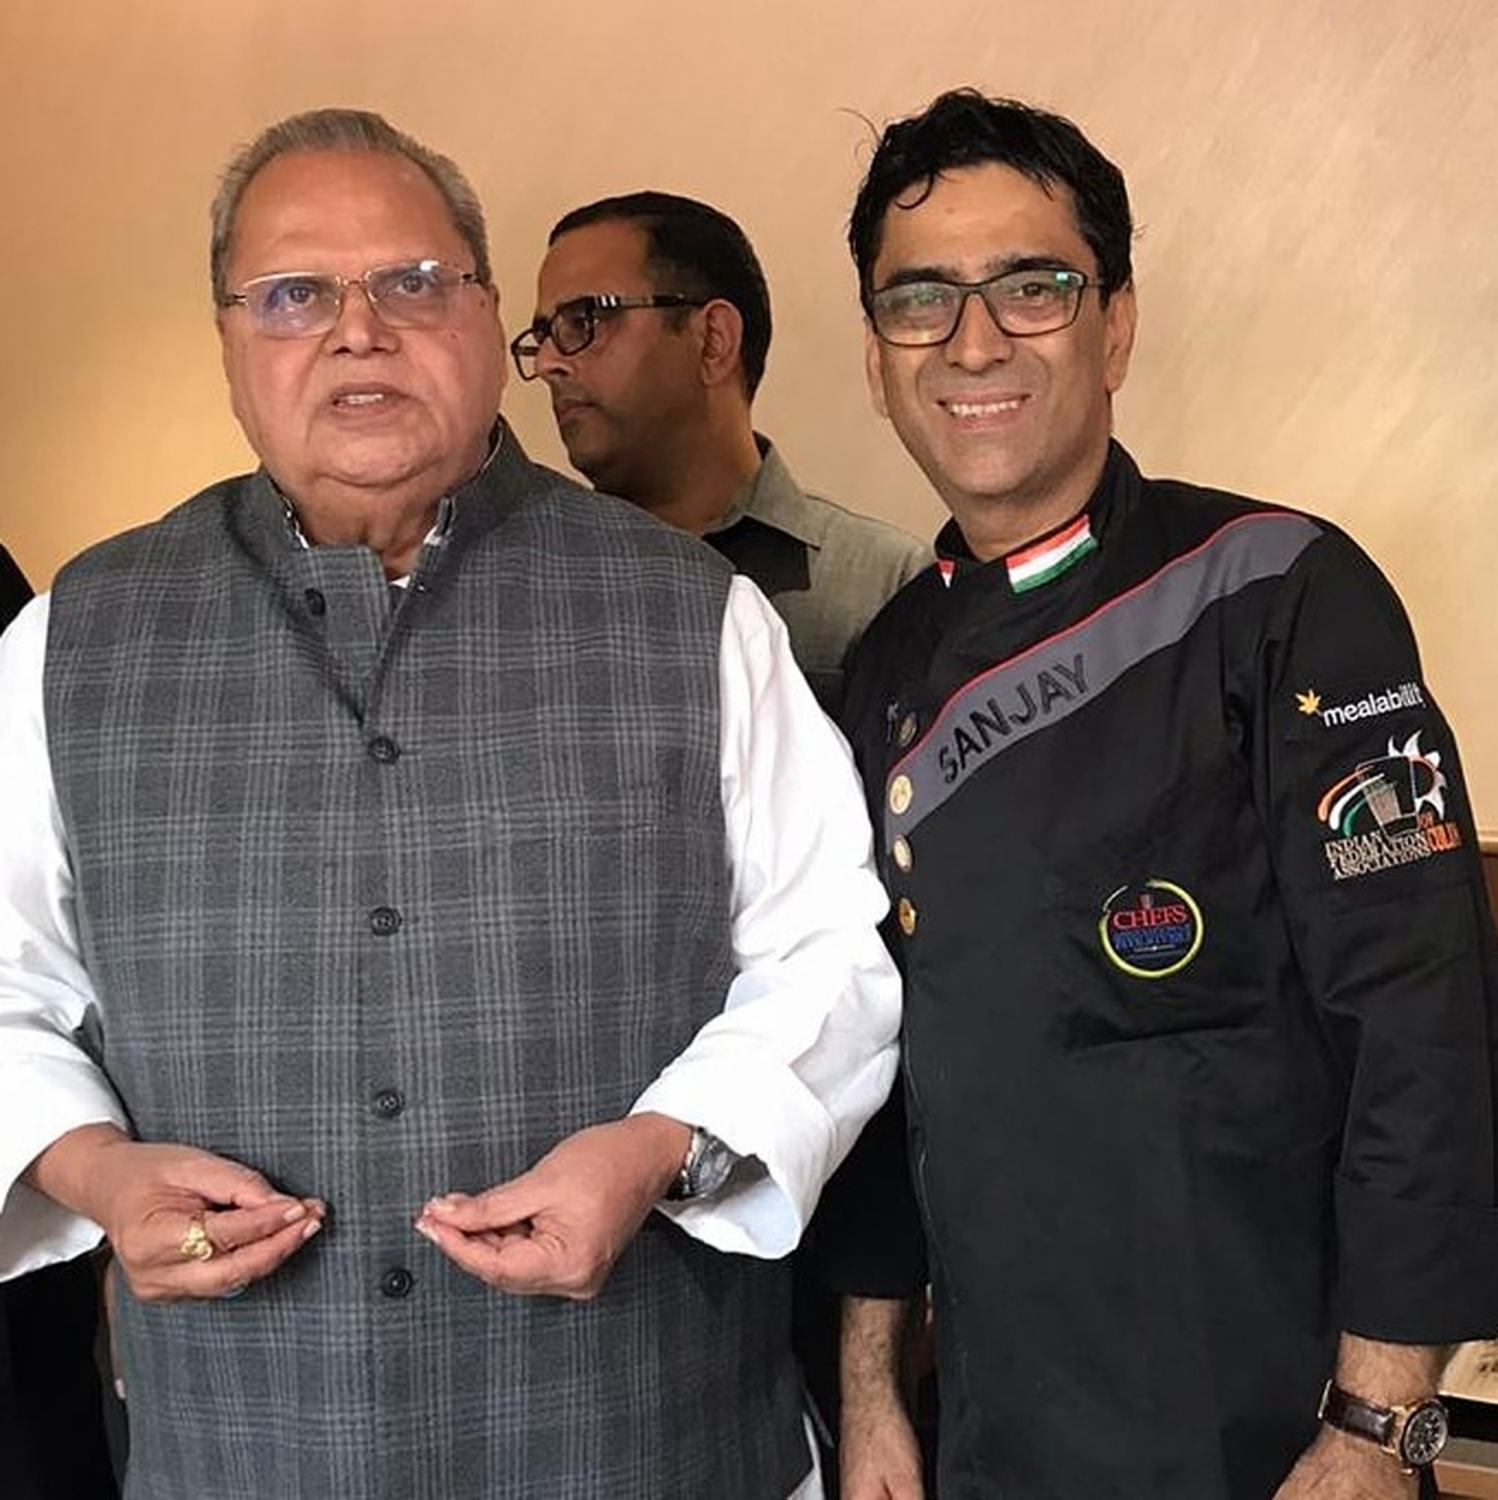 Jammu and Kashmir Governor Satya Pal Malik during the inauguration of the Kashmiri cuisine restaurant "Mealability - The Flovour of Kashmir" at the J&K House in New Delhi on Oct 21, 2019. (Photo: IANS)